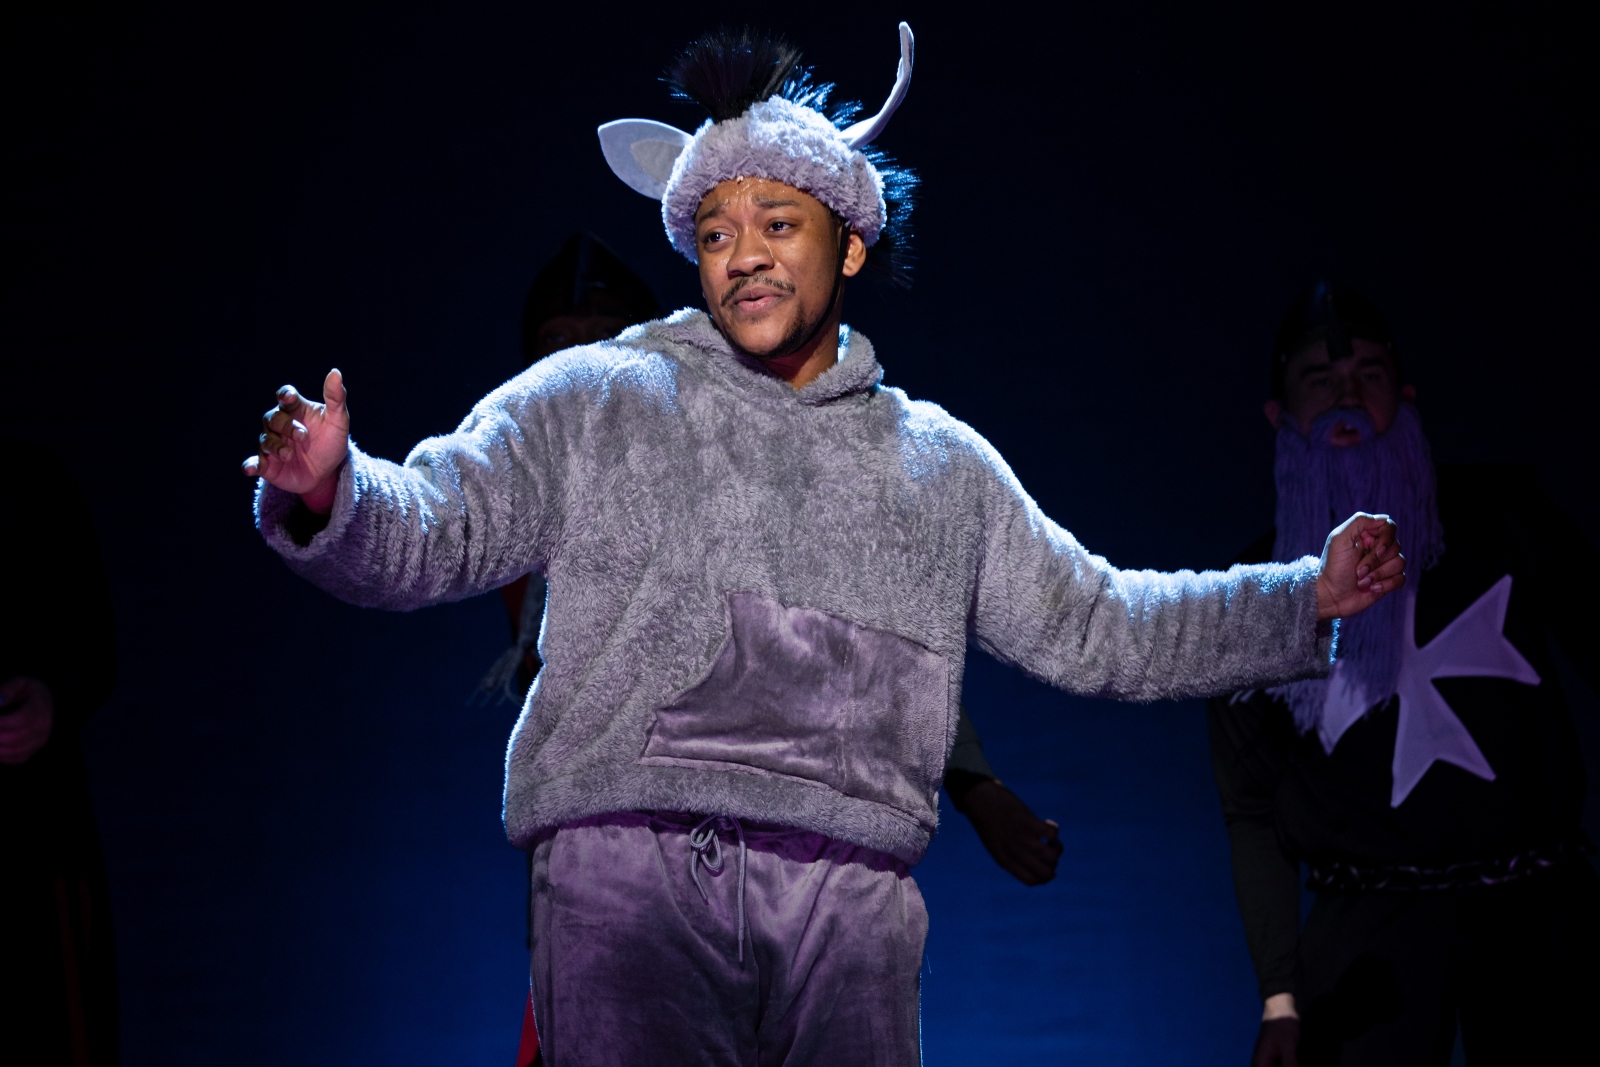 Naphtali Yaakov Curry plays Donkey in "Shrek the Musical." (Photo by Full Out Creative)